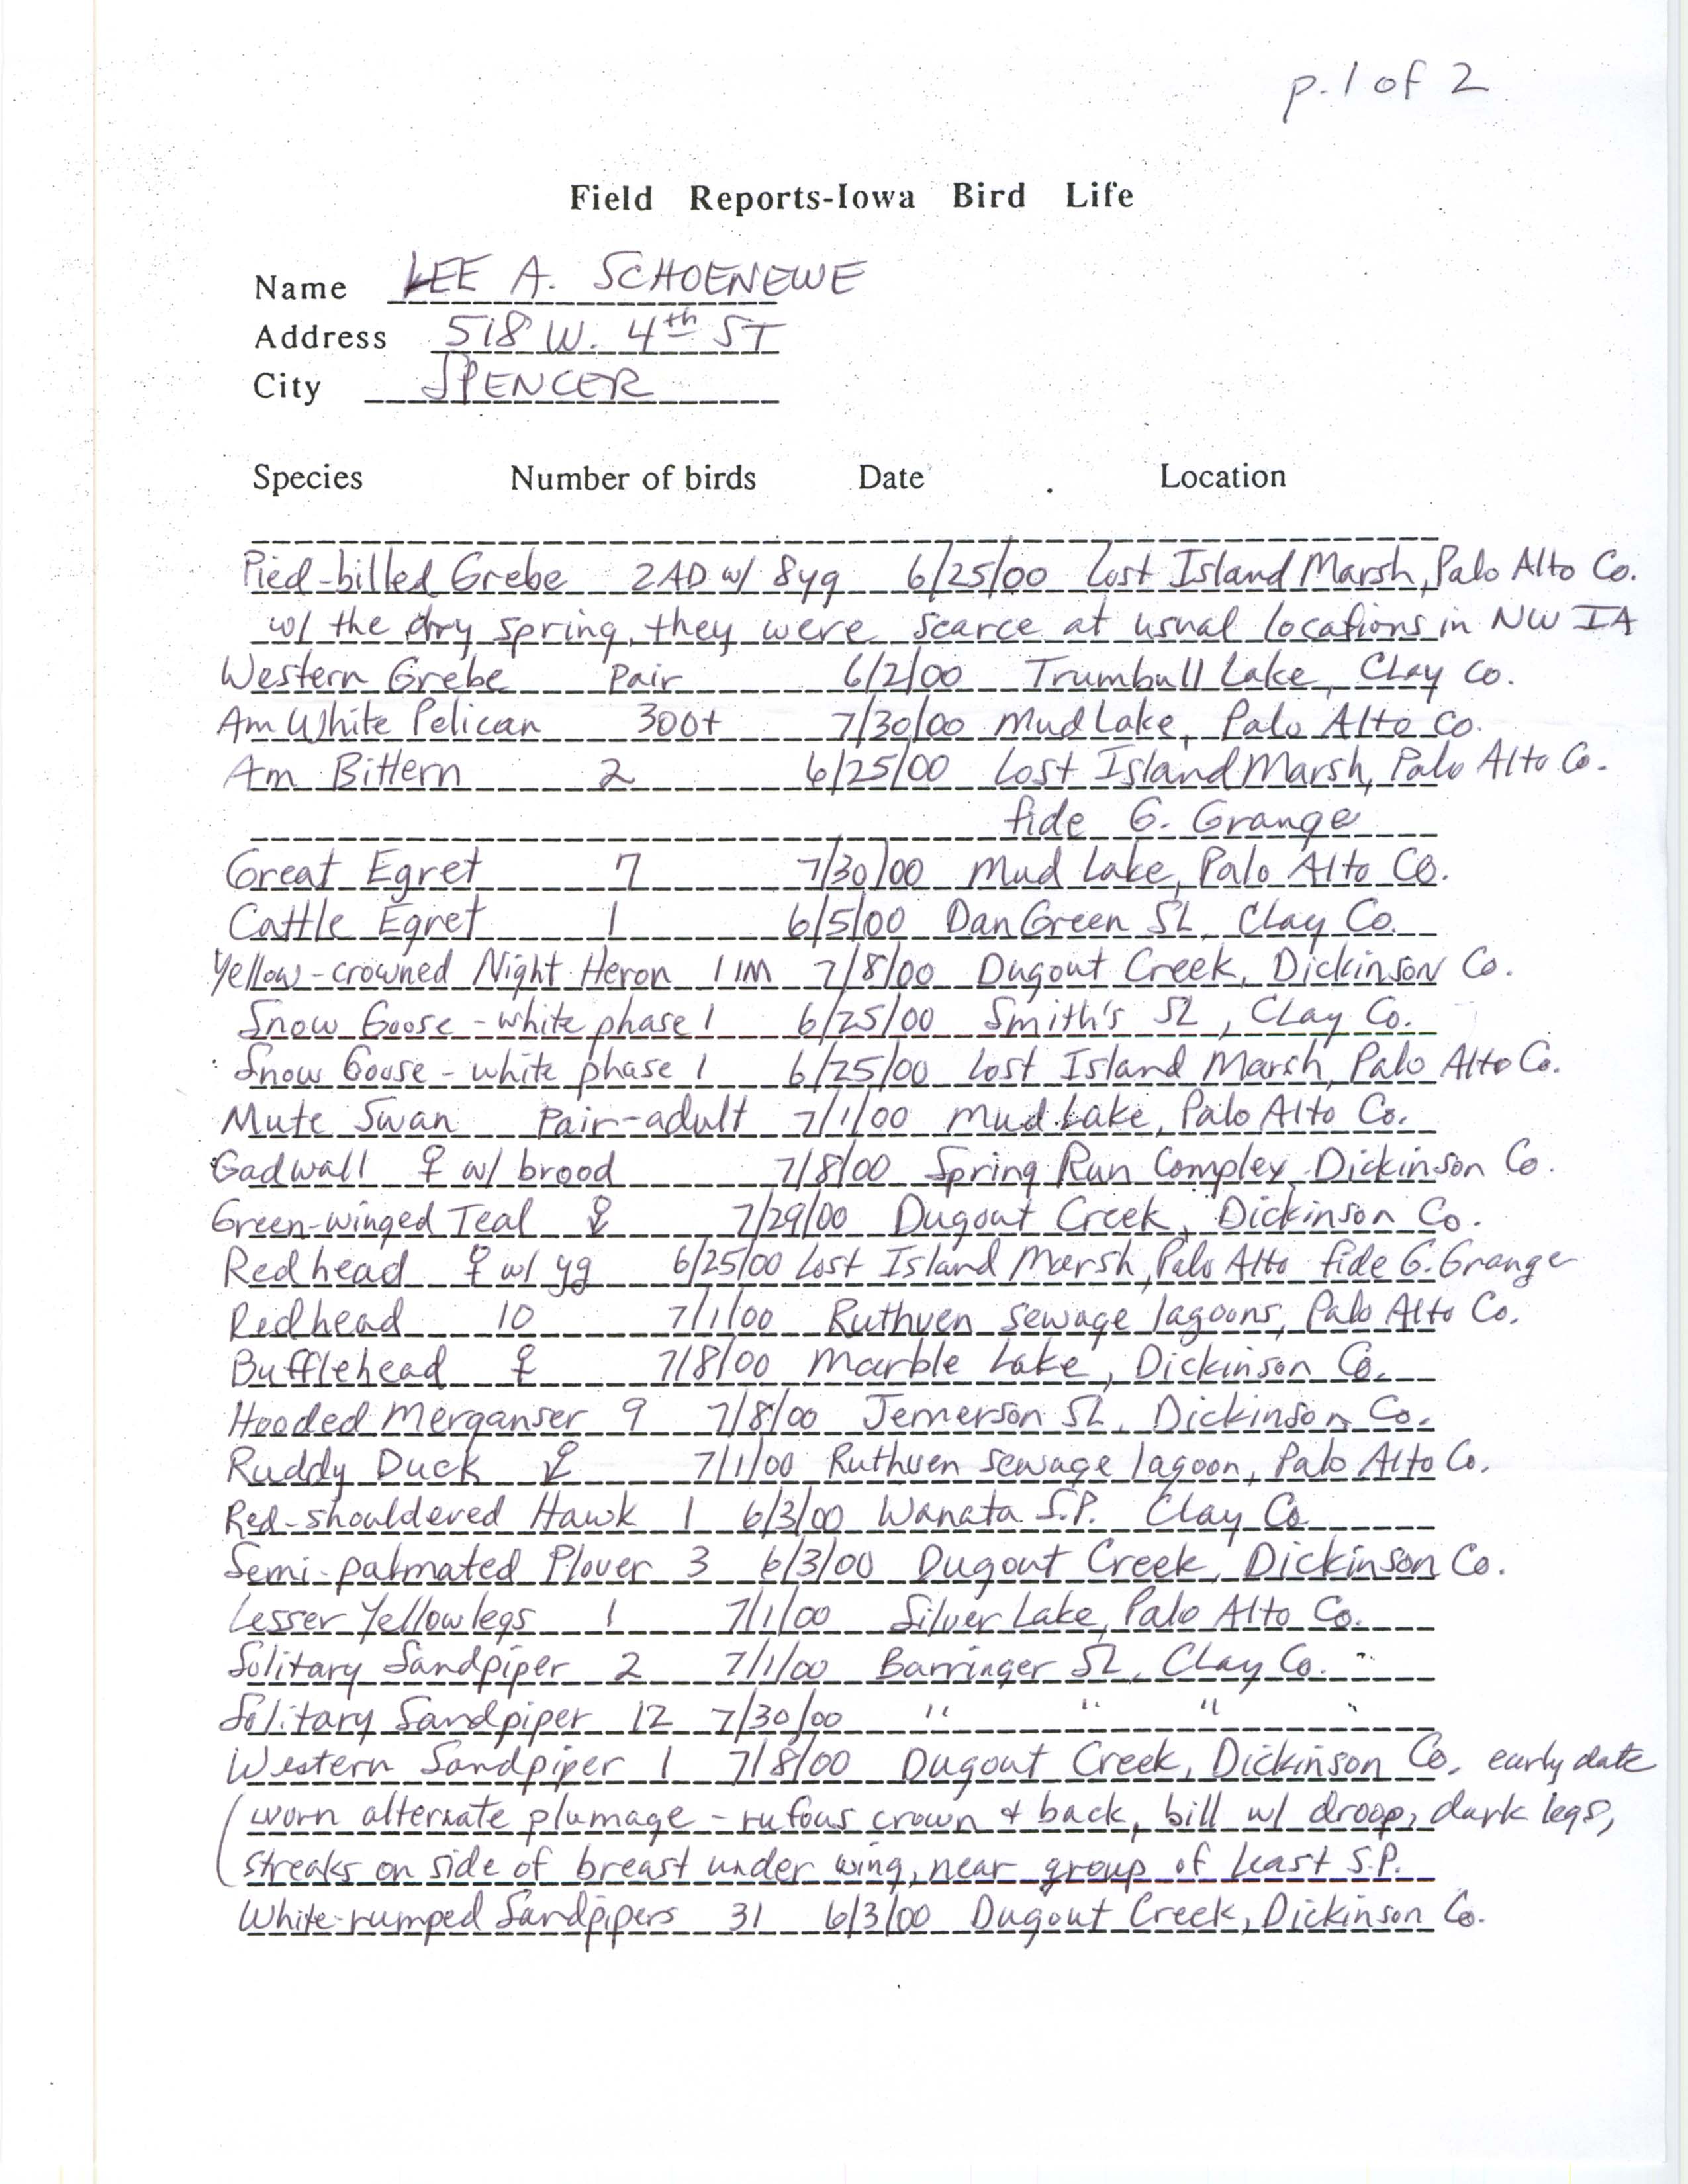 Field notes contributed by Lee A. Schoenewe, summer 2000